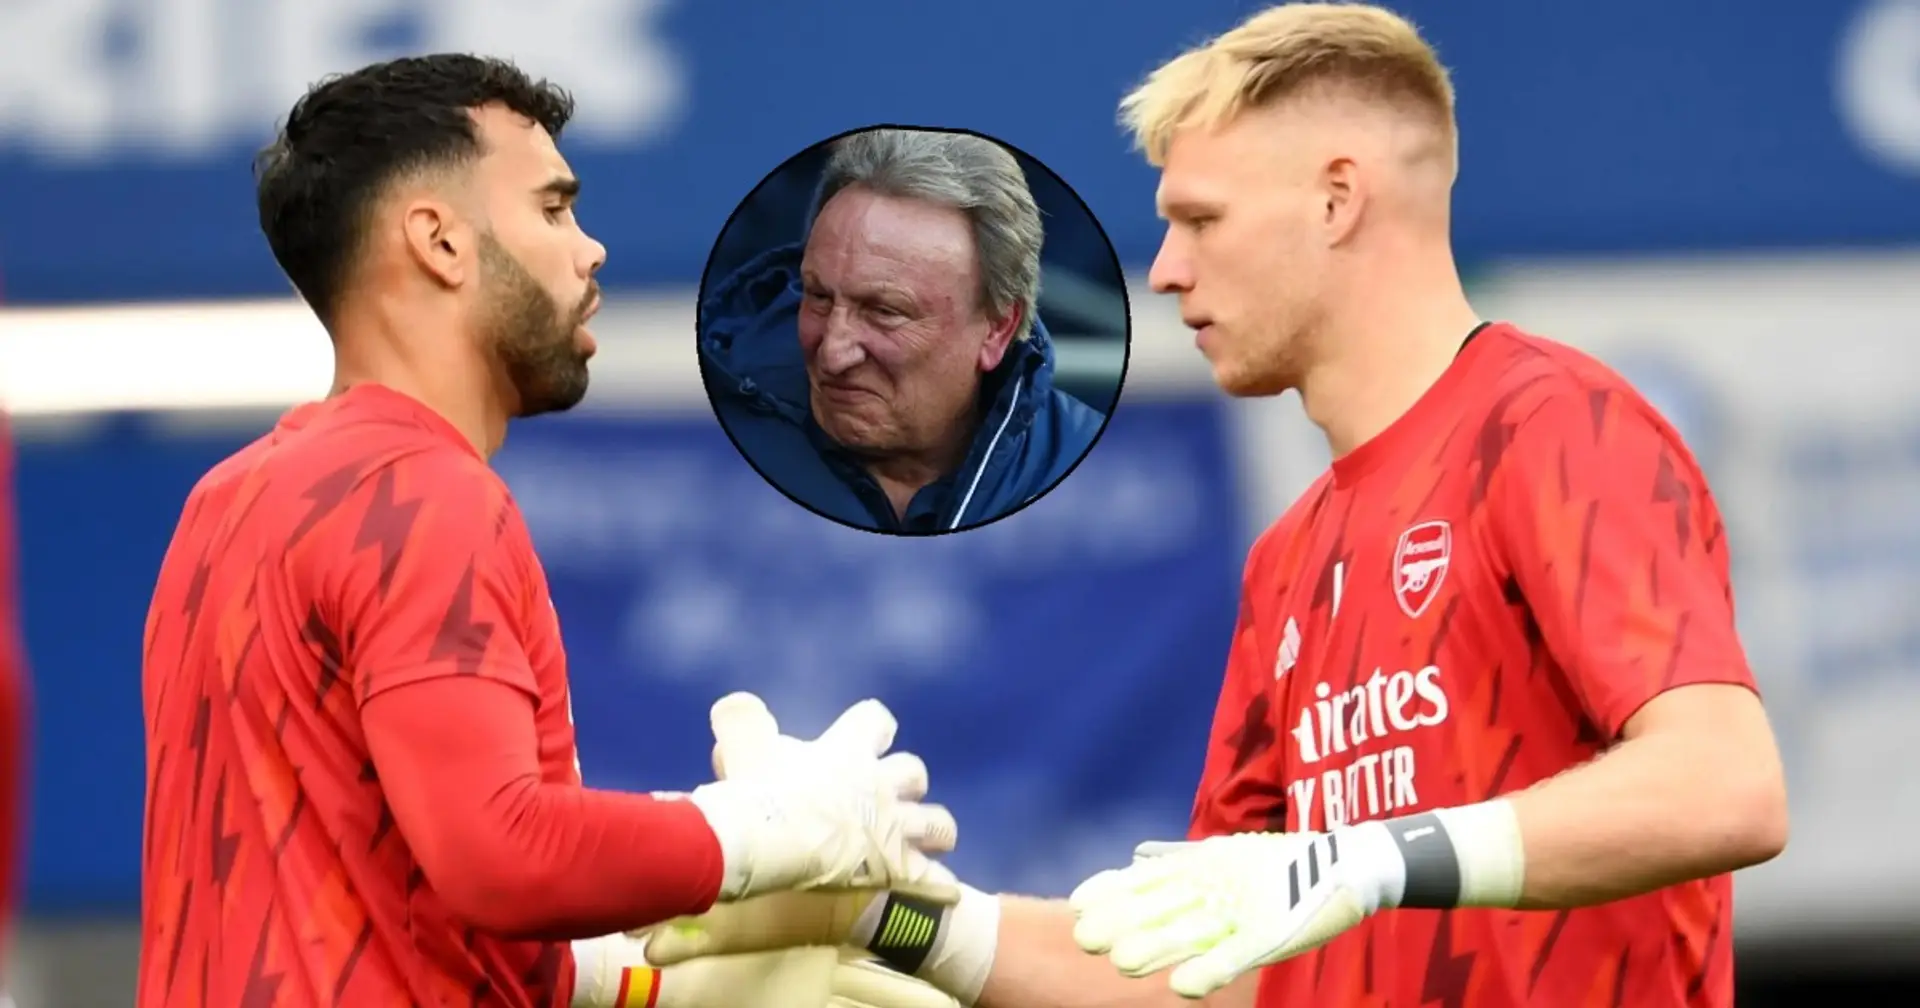 'You can't have your cake and eat it': Neil Warnock slams Arteta over Raya-Ramsdale situation